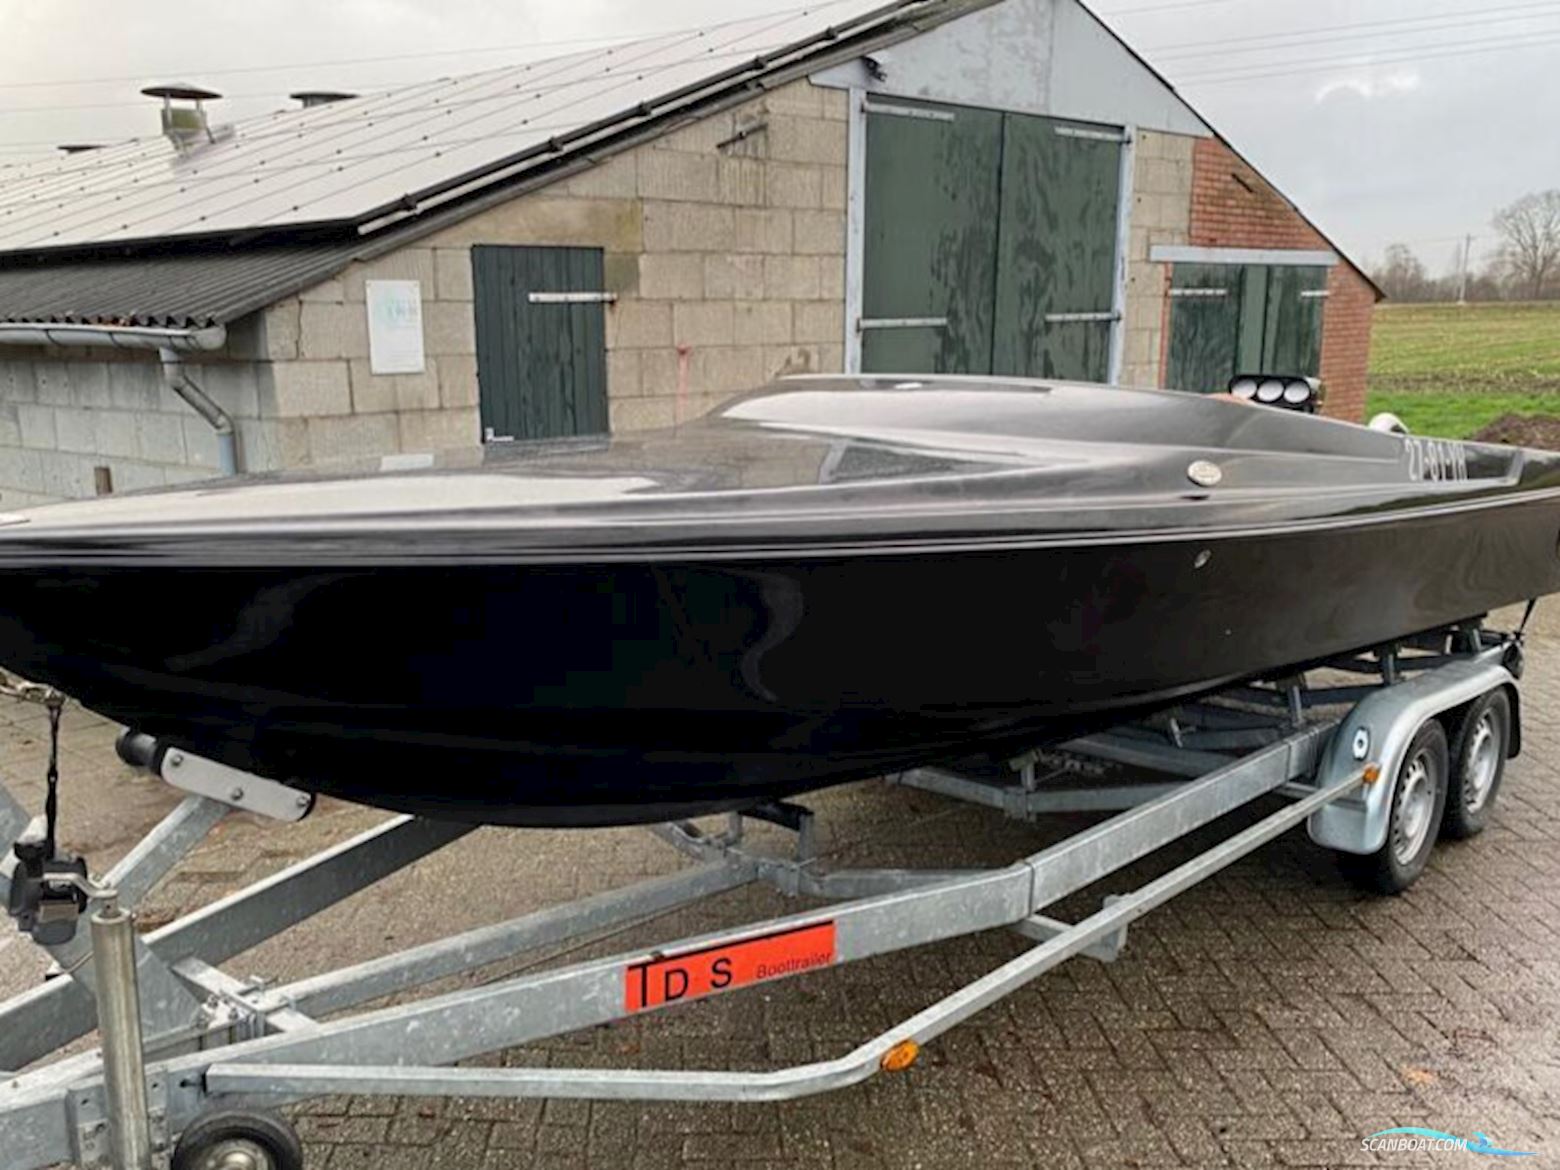 Cycloon 700 Motor boat 2006, with Chevy Big Block engine, The Netherlands